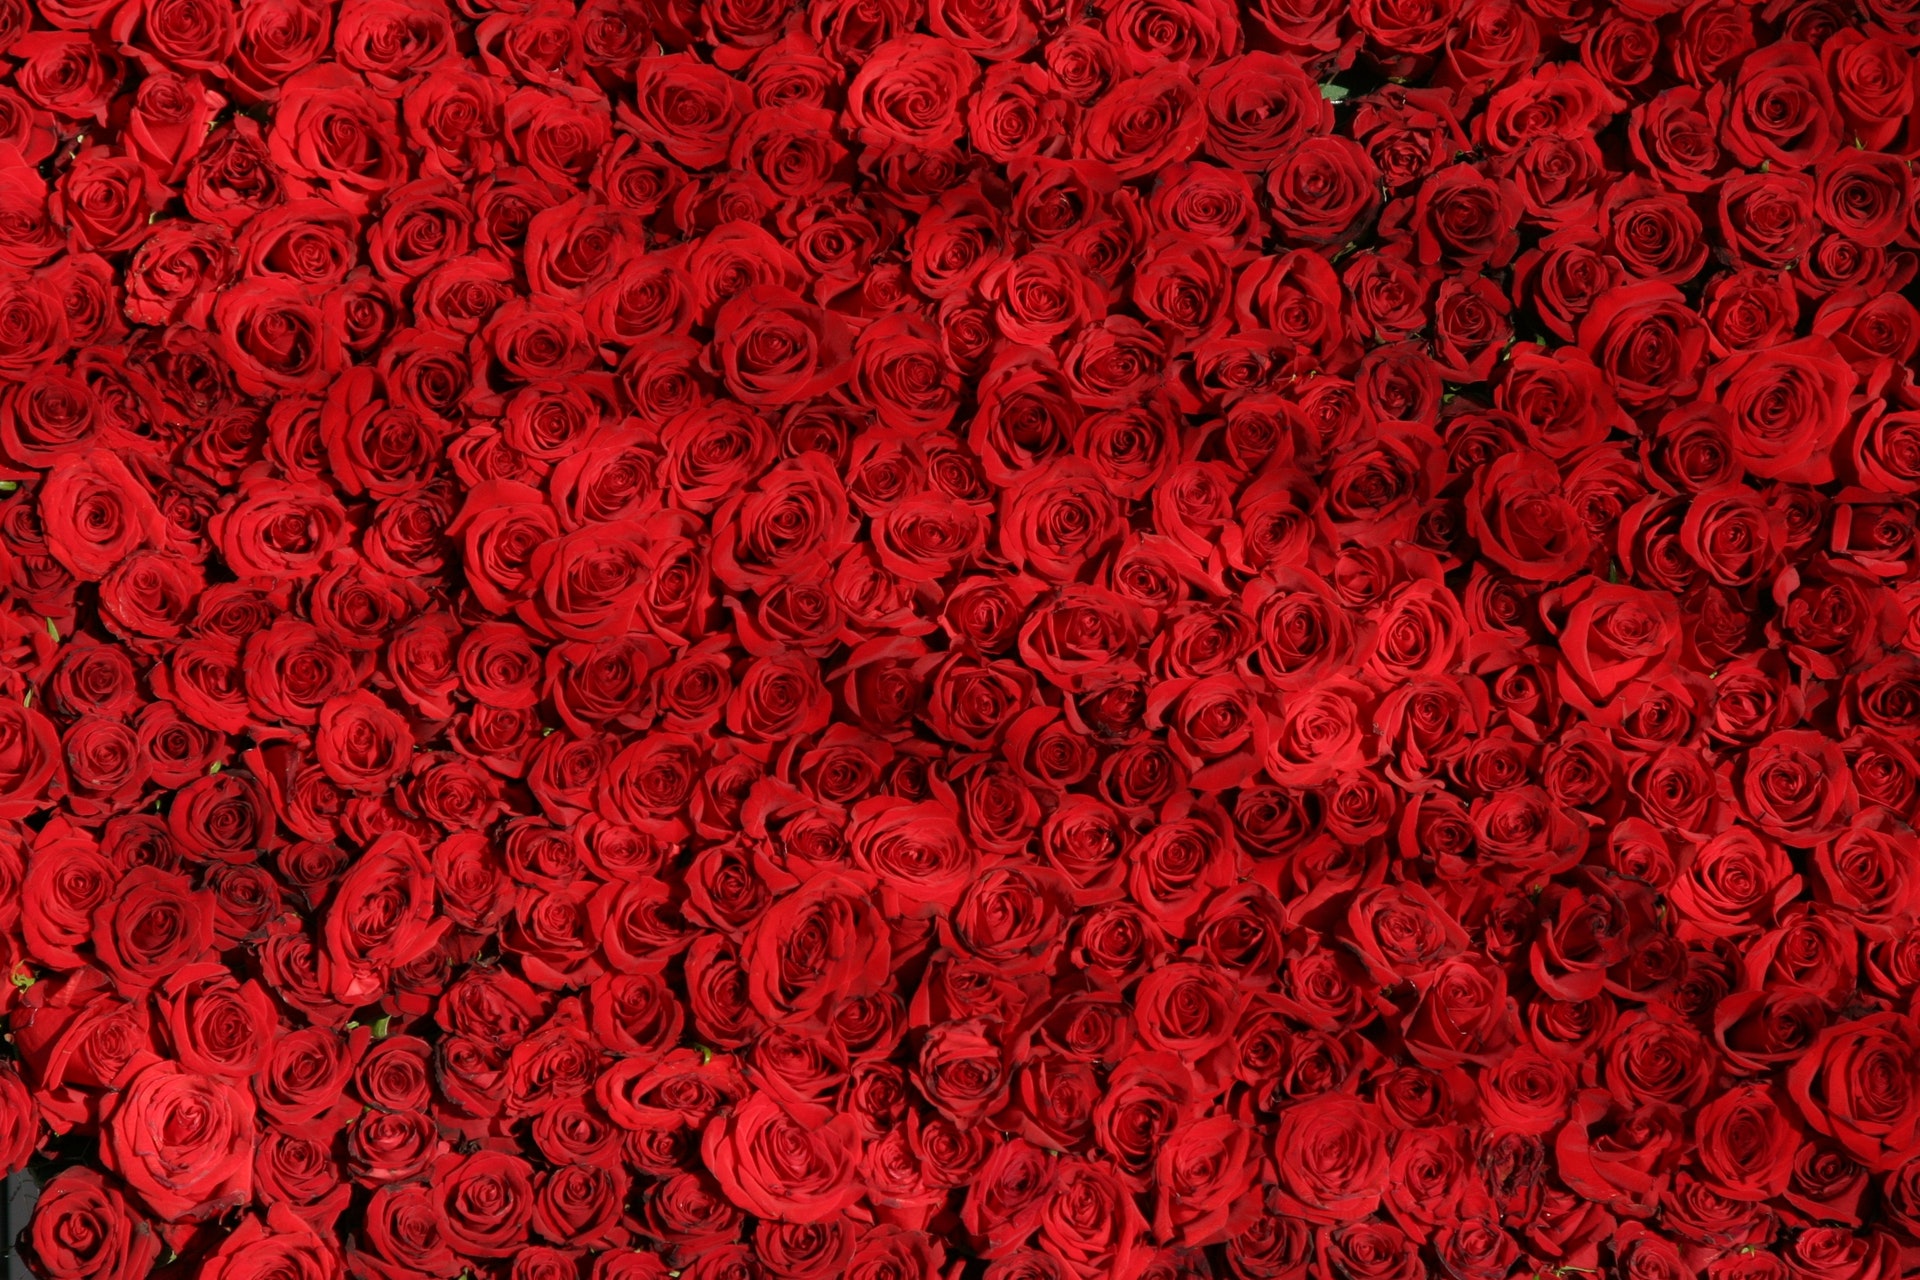 rose-roses-flowers-red-54320